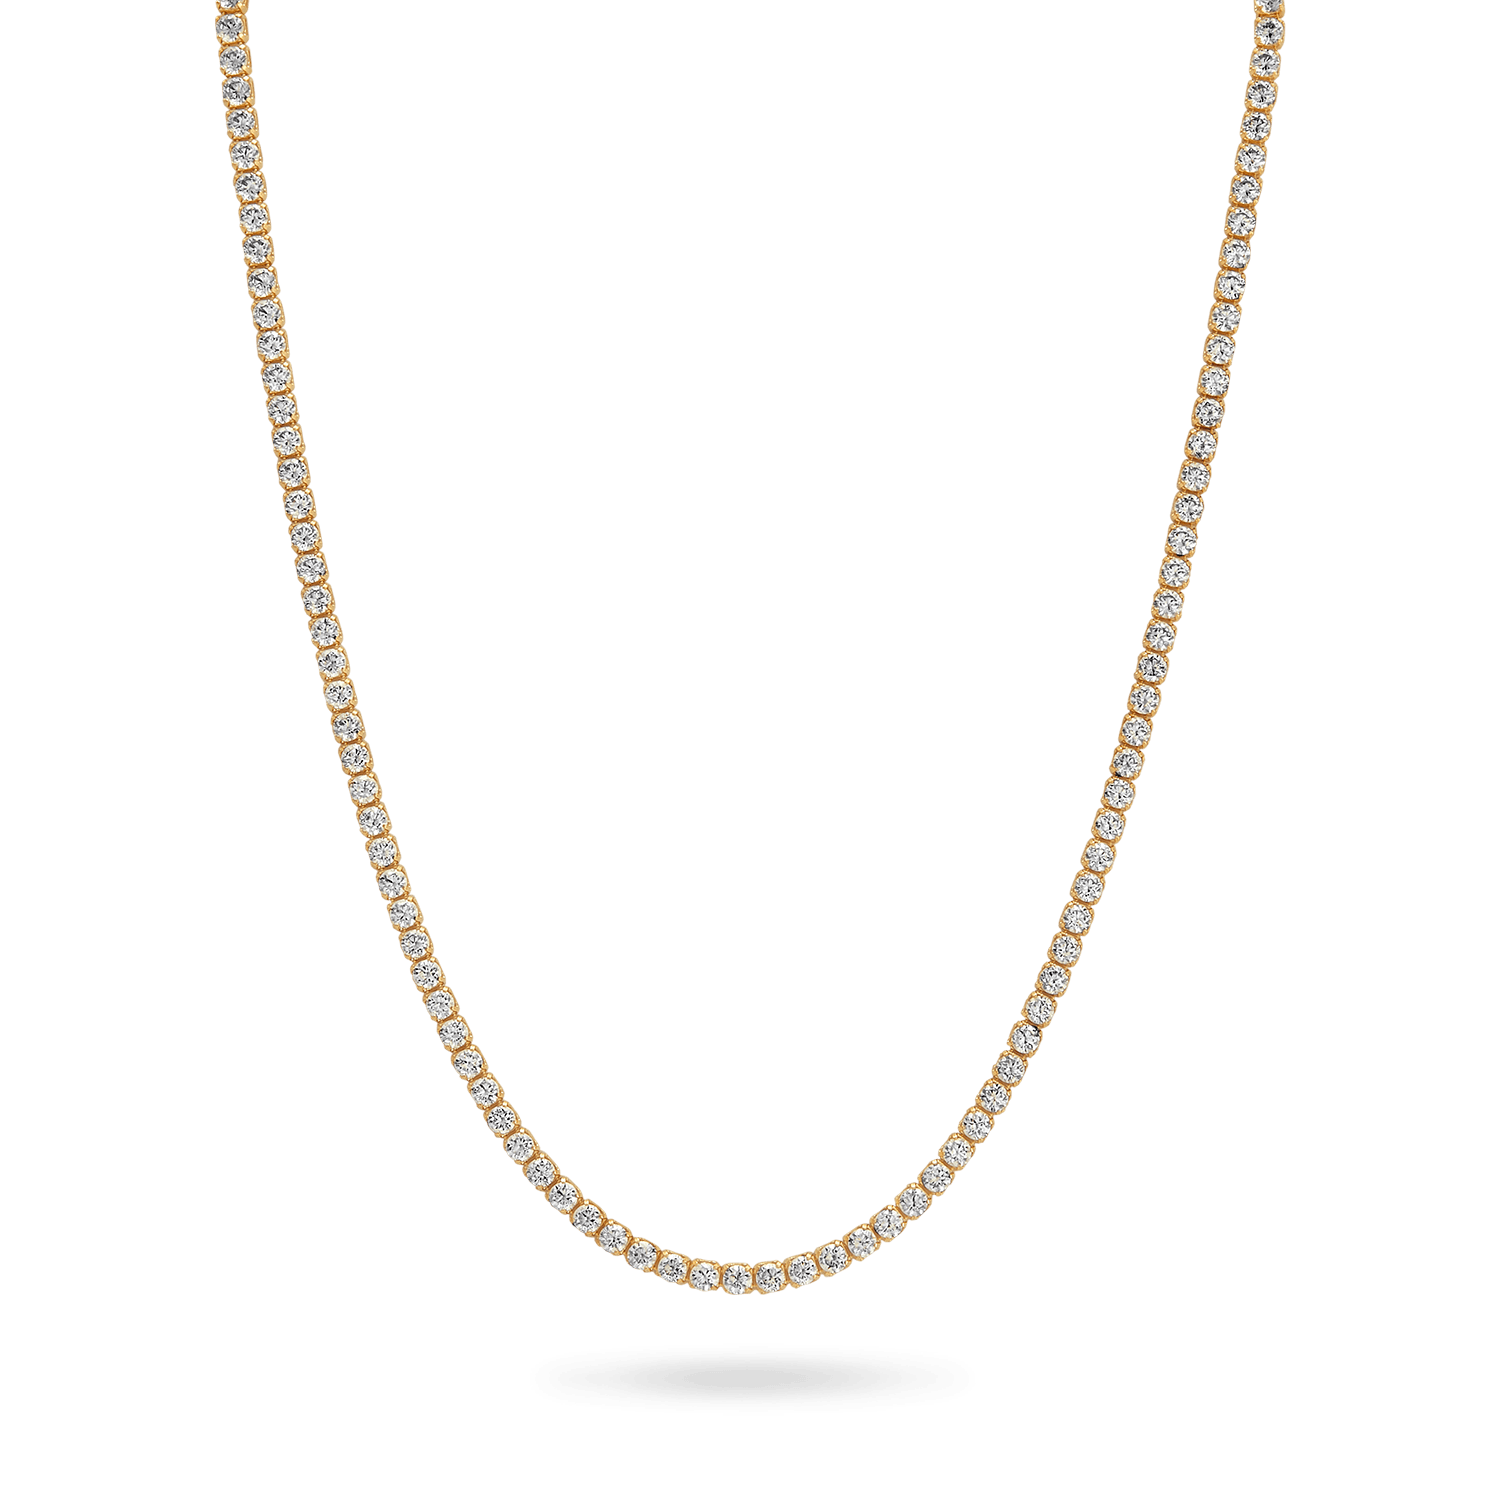 10K Gold Moissanite Tennis Necklace 3.25mm Necklaces IceLink-CAL   